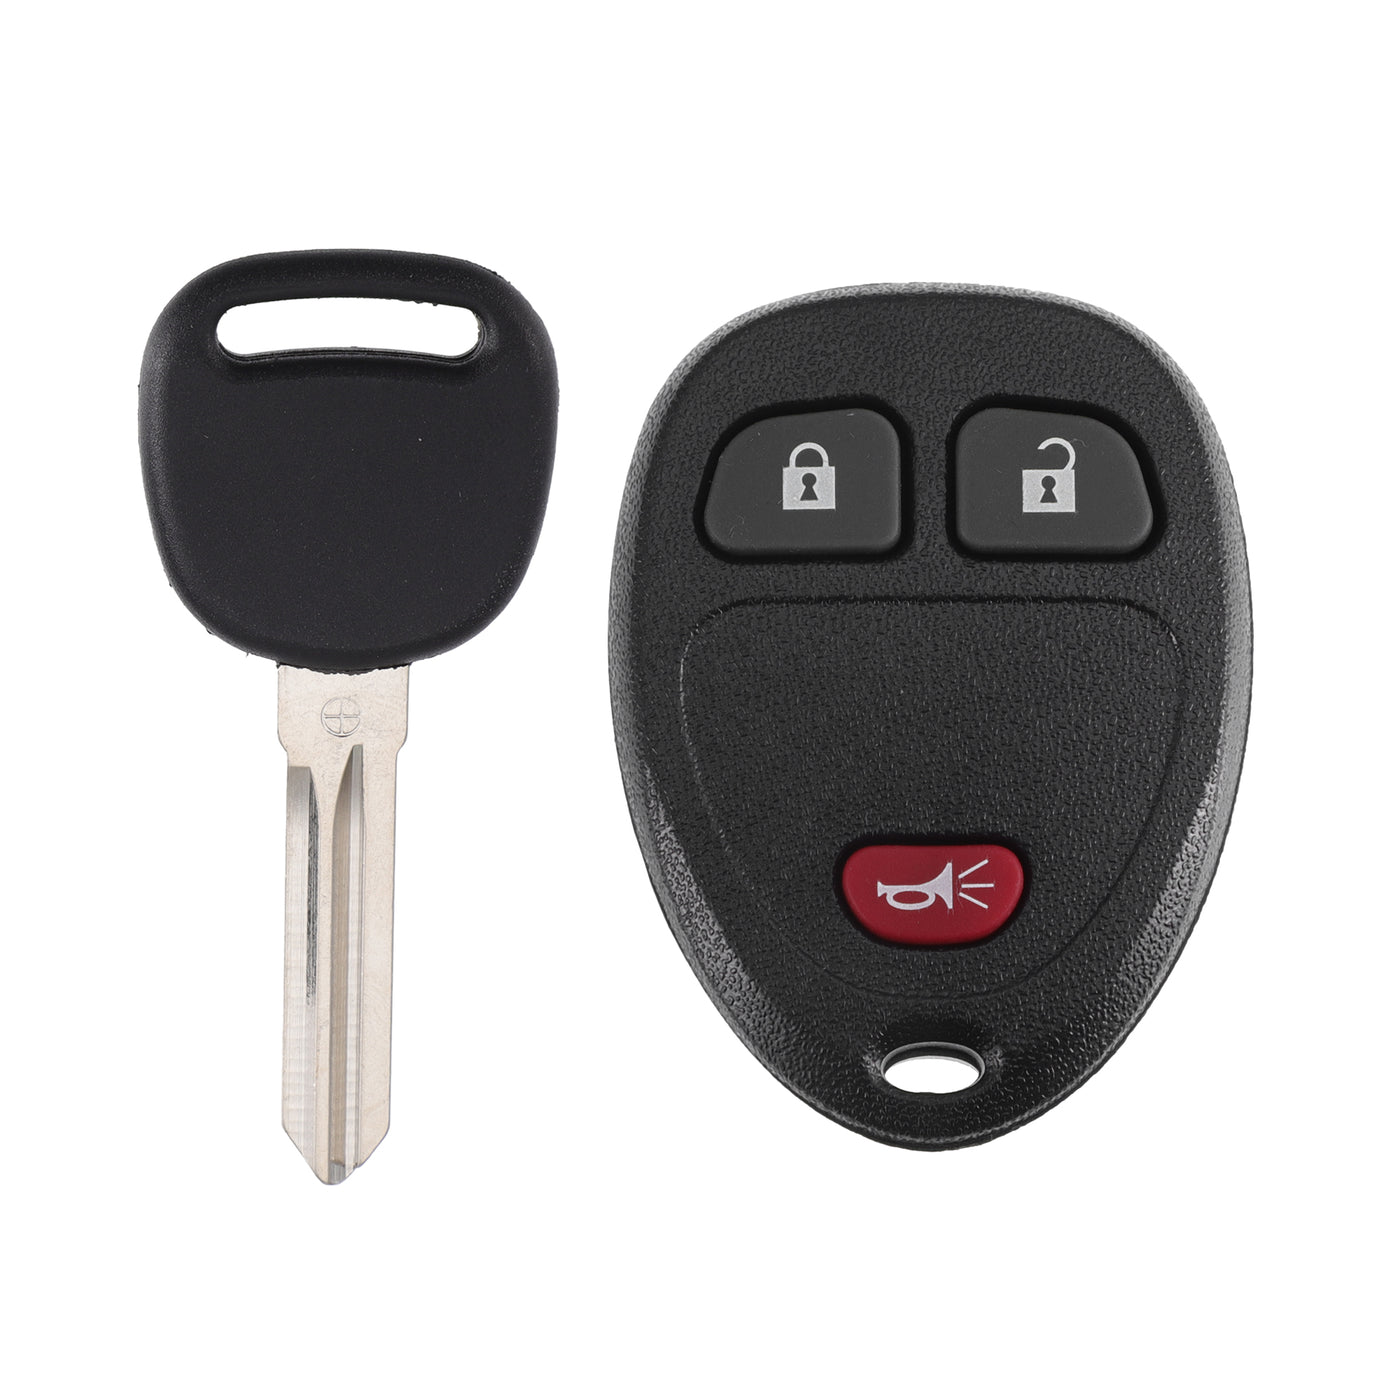 X AUTOHAUX KOBGT04A 315MHz Keyless Entry Remote Ignition Transponder Key Fob for Chevrolet HHR 2006-2011 for Chevy Uplander 2006-2008 for Buick Terraza 2006-2007 3 Buttons